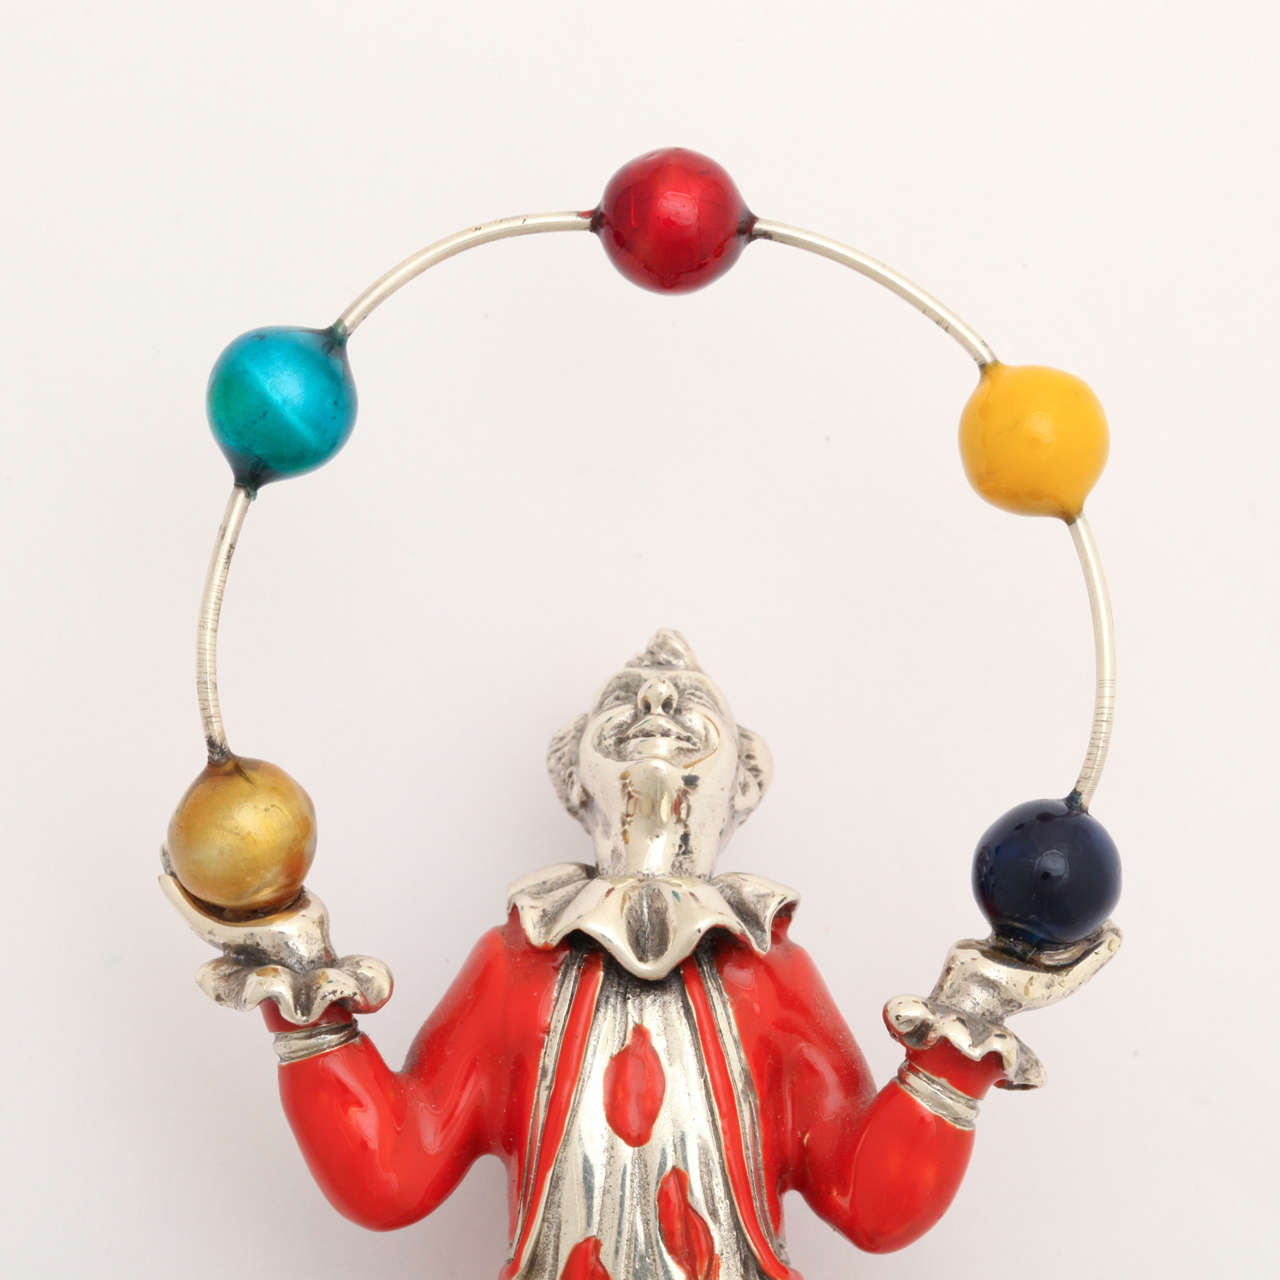 Chrome 1960s Polychromed Juggler Figurine Created by Gene Moore for Tiffany & Co. For Sale